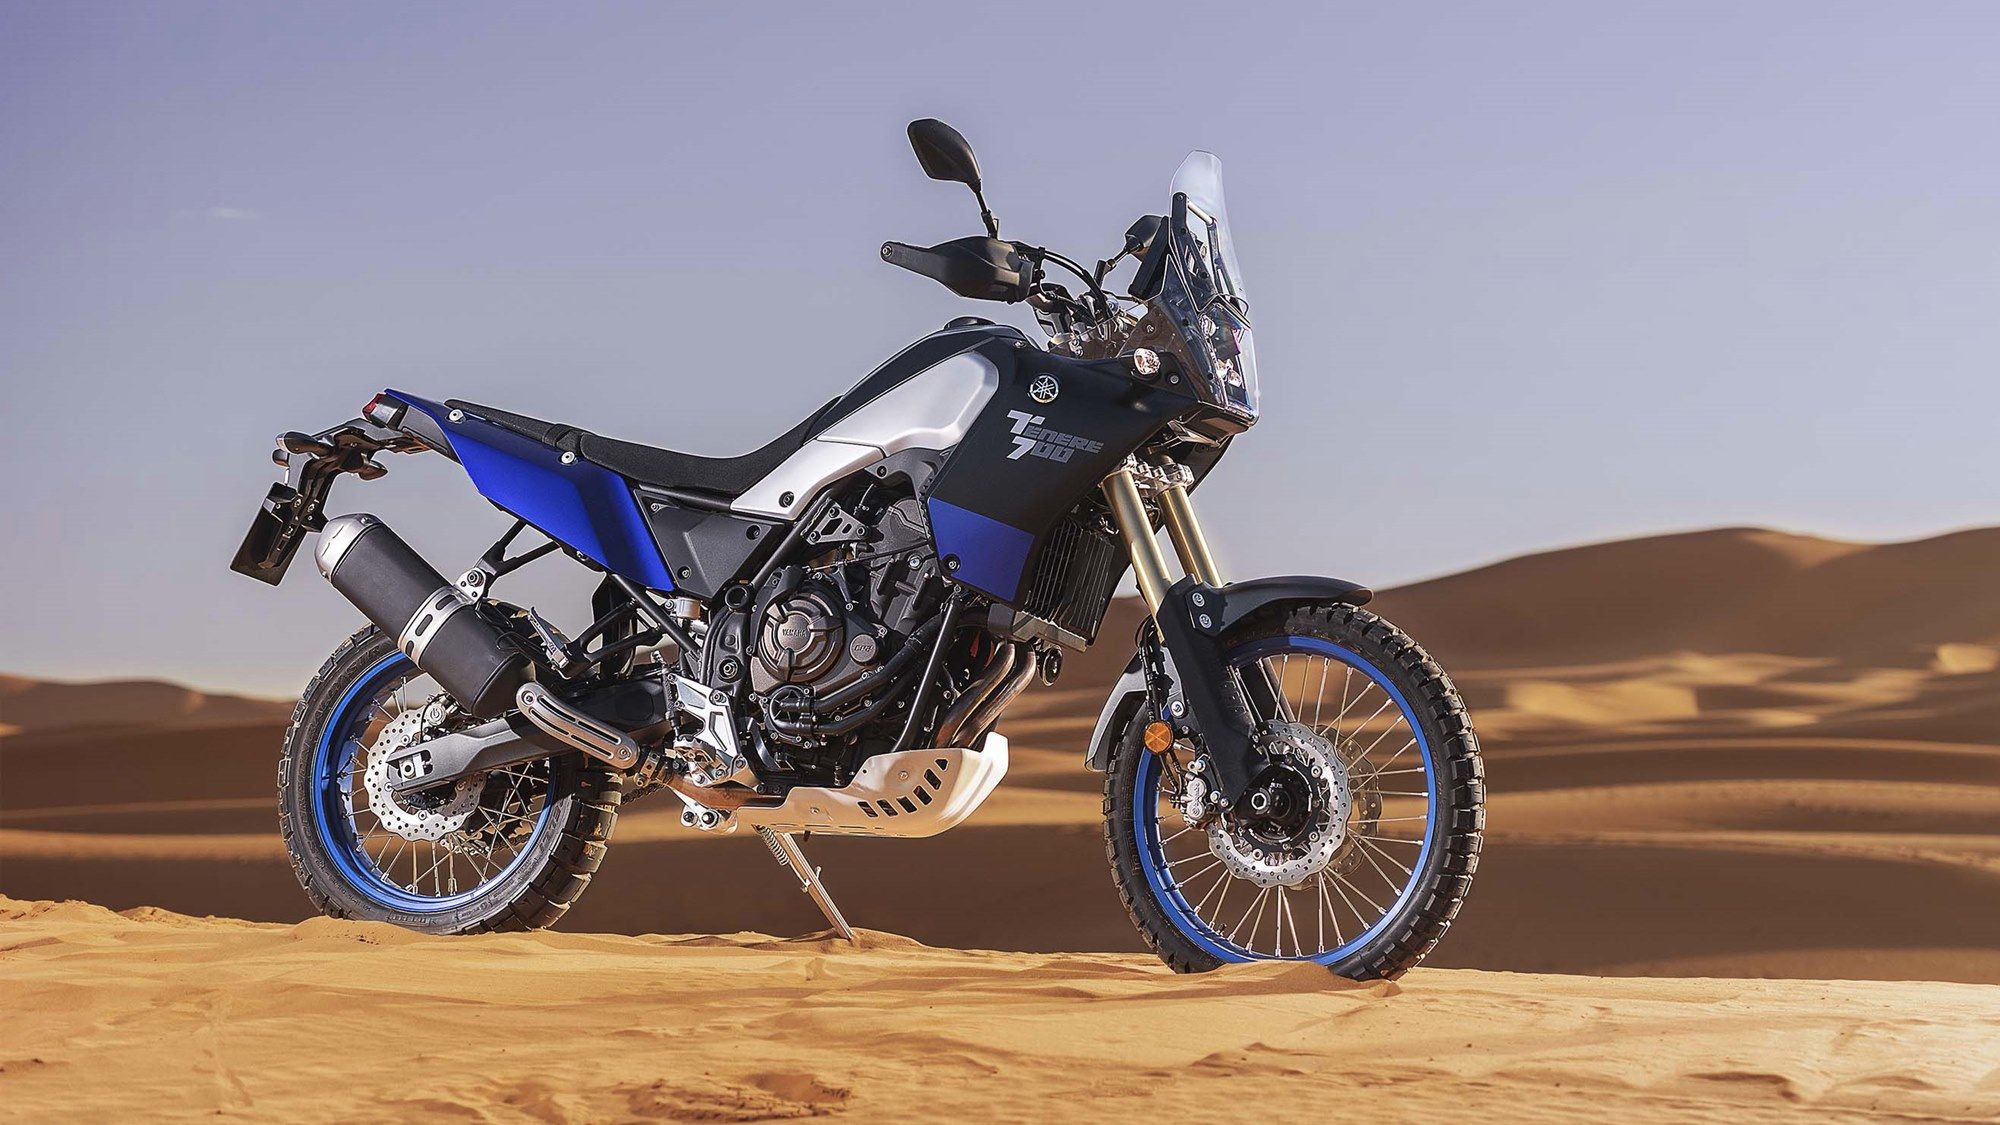 Yamaha Tenere 300 to be developed? Sounds exciting already. IAMABIKER Motorcycle!